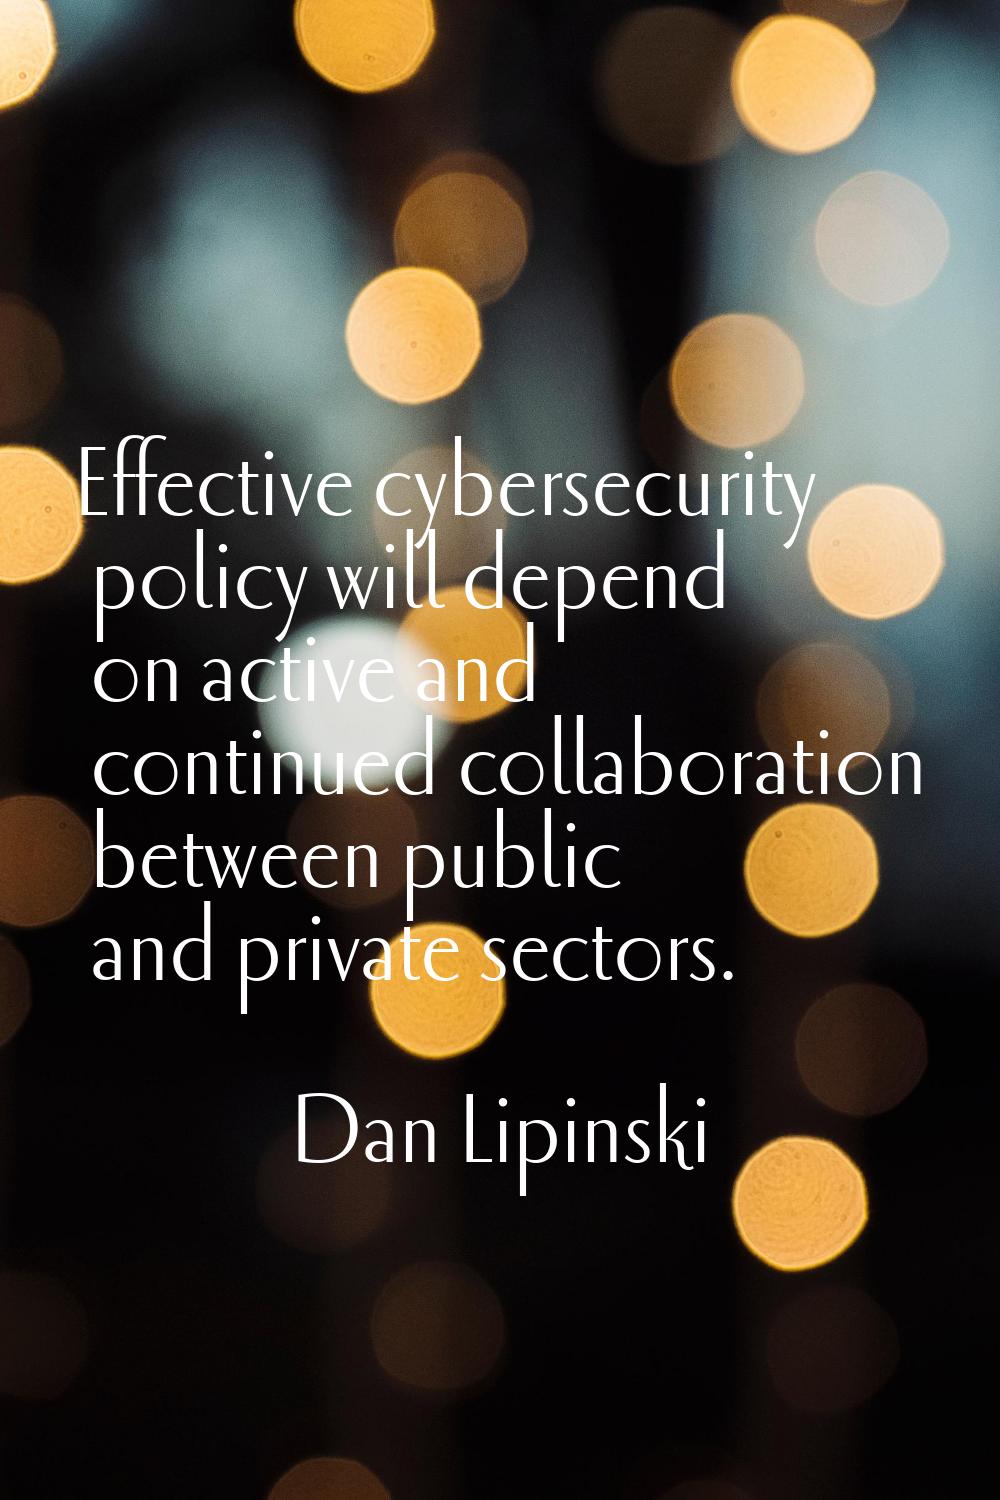 Effective cybersecurity policy will depend on active and continued collaboration between public and